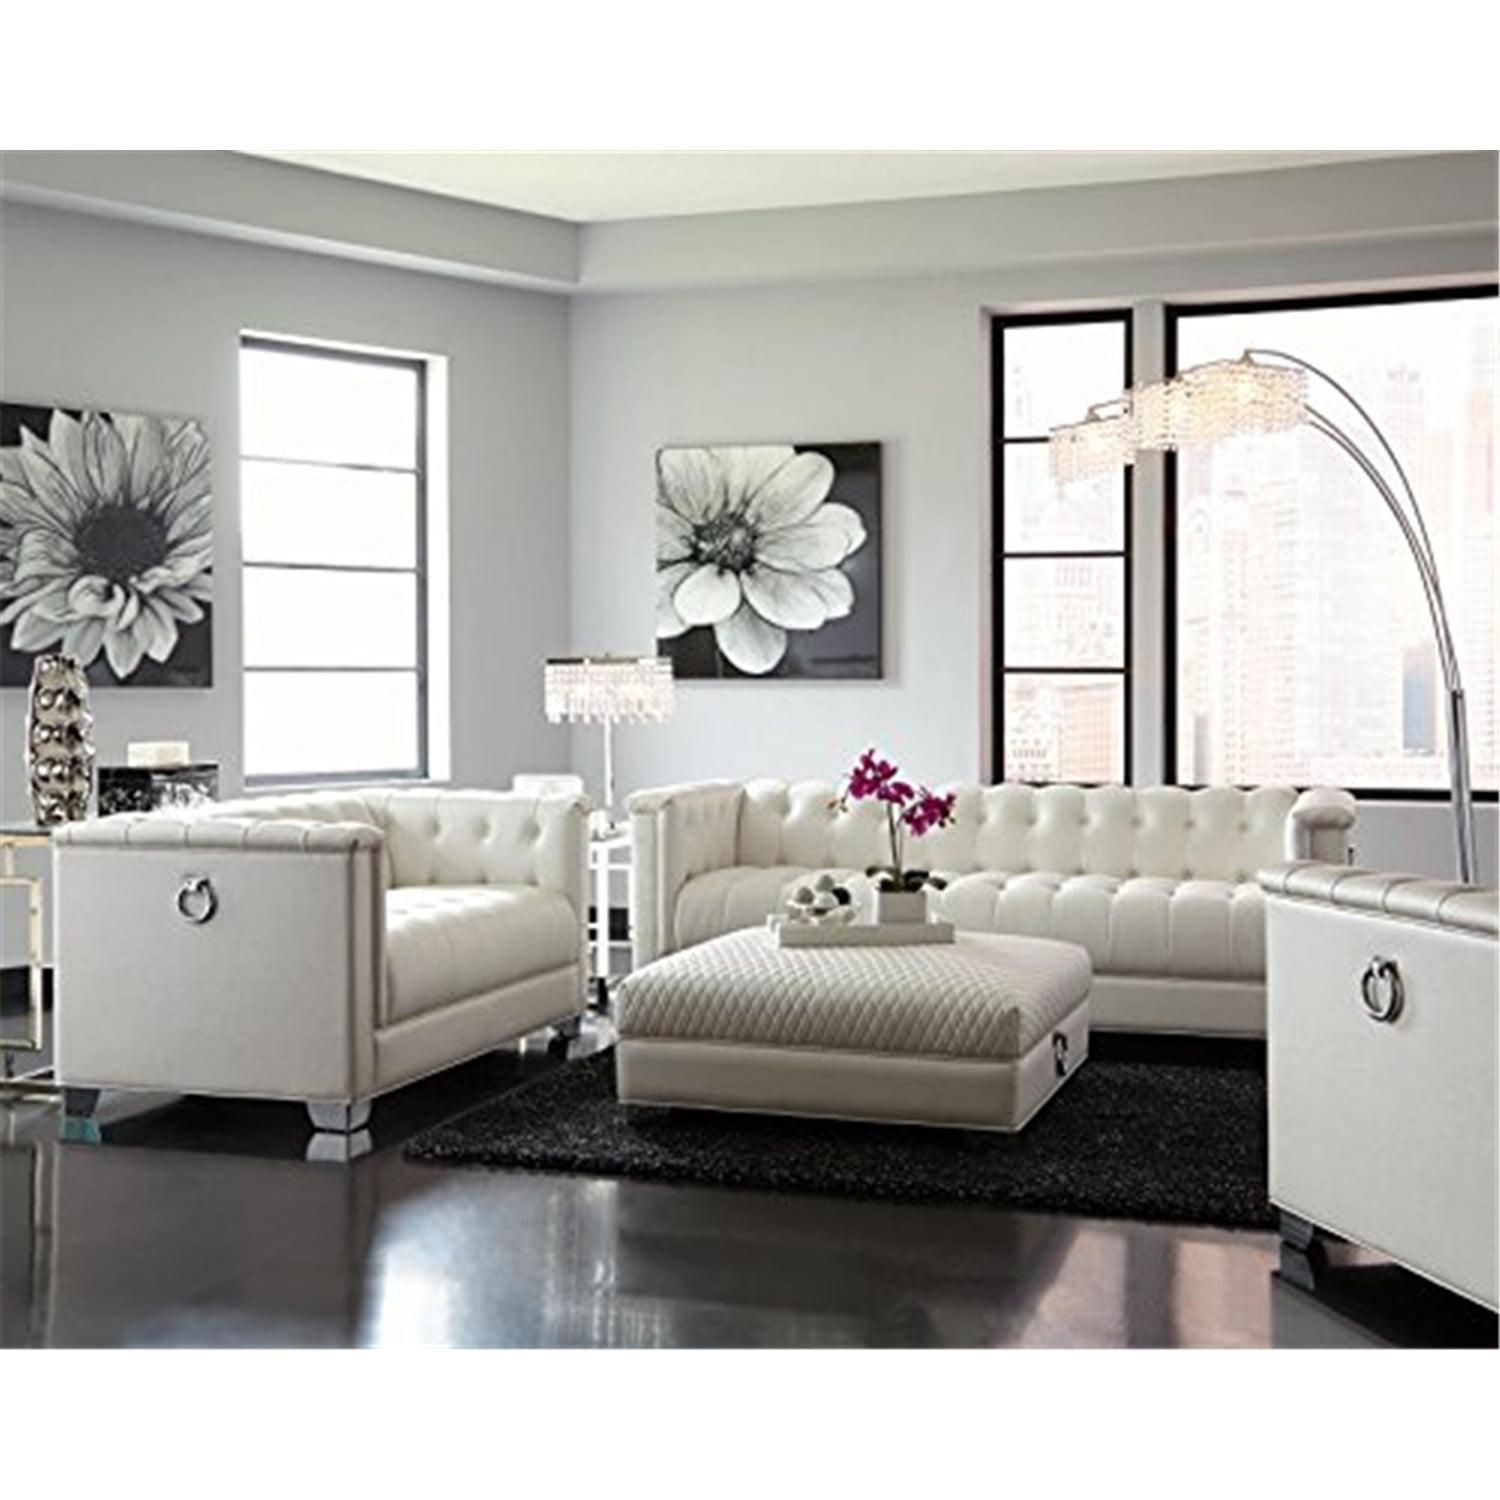 Pearl White Glamourous Tufted Sofa Set with Chrome Details